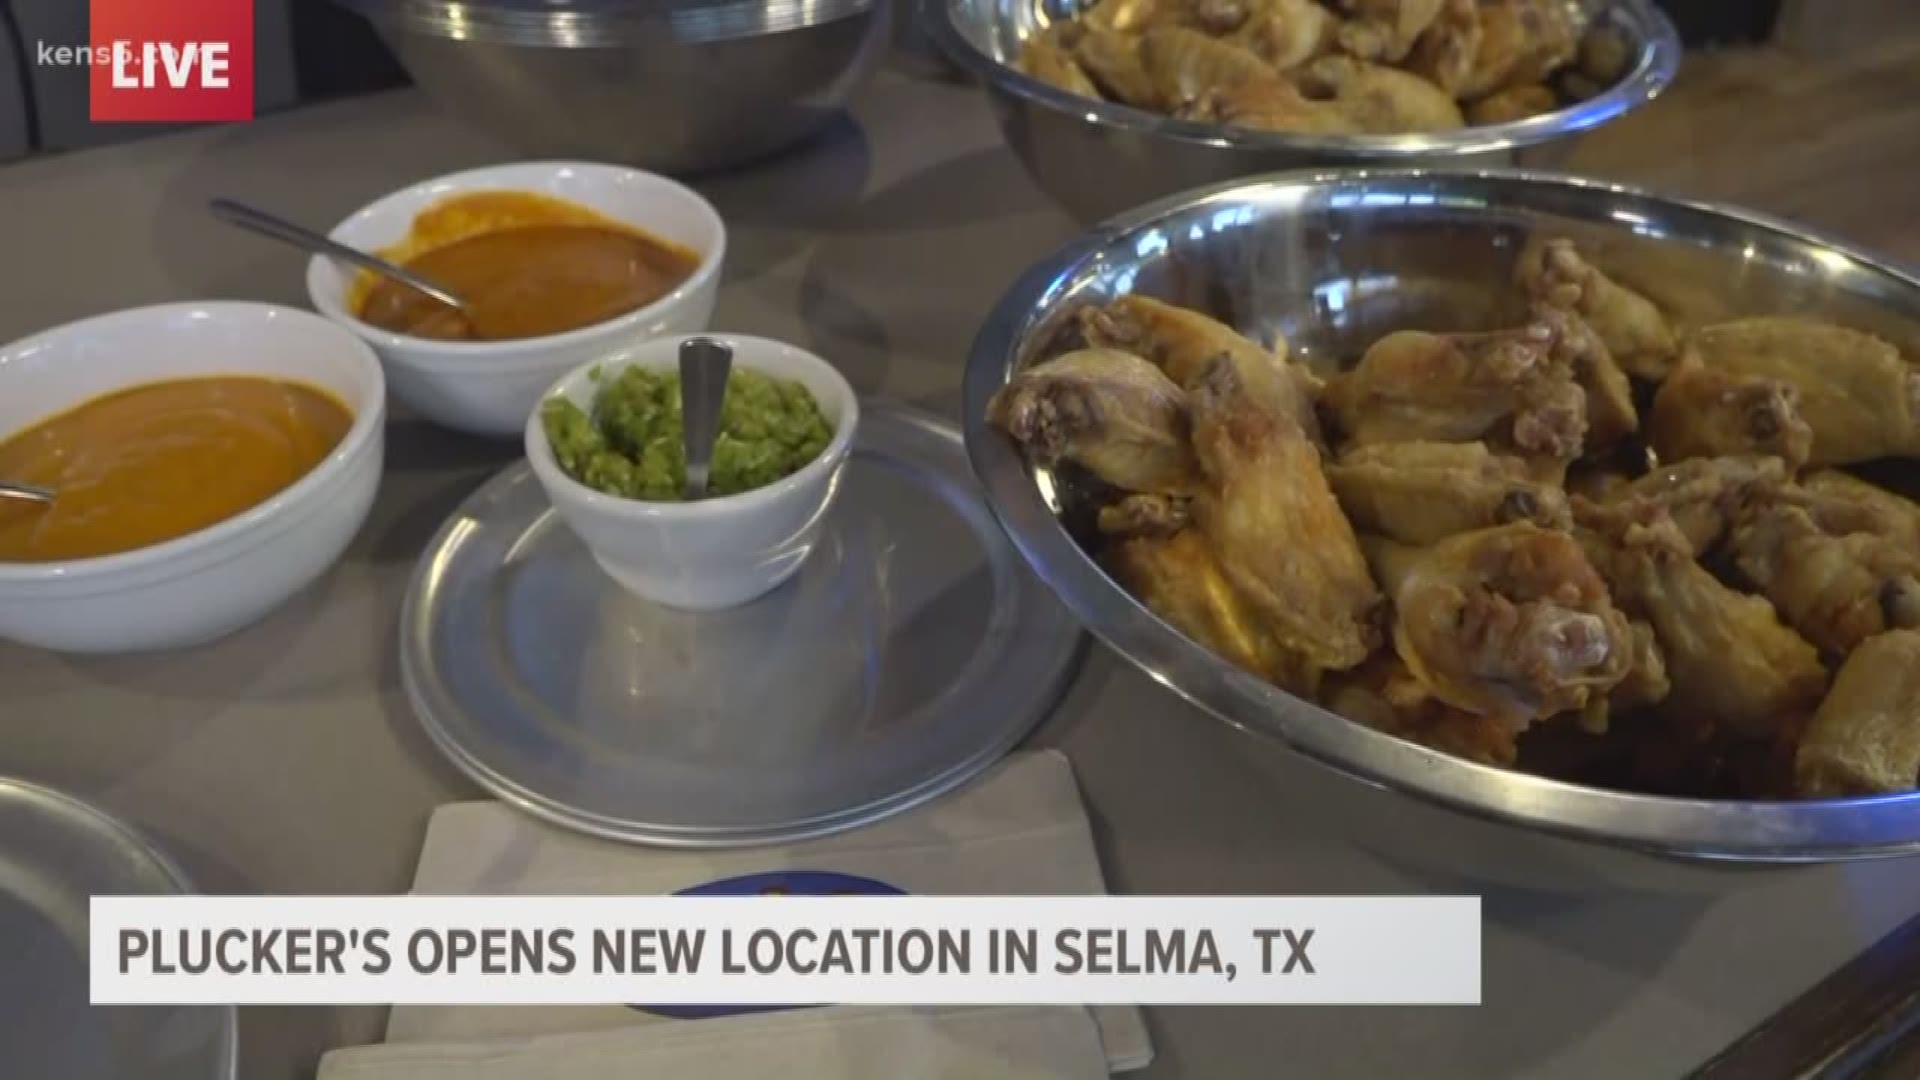 Pluckers started in Austin and is now expanding to the San Antonio area. The restaurant has a cult following is expected to do well in San Antonio.